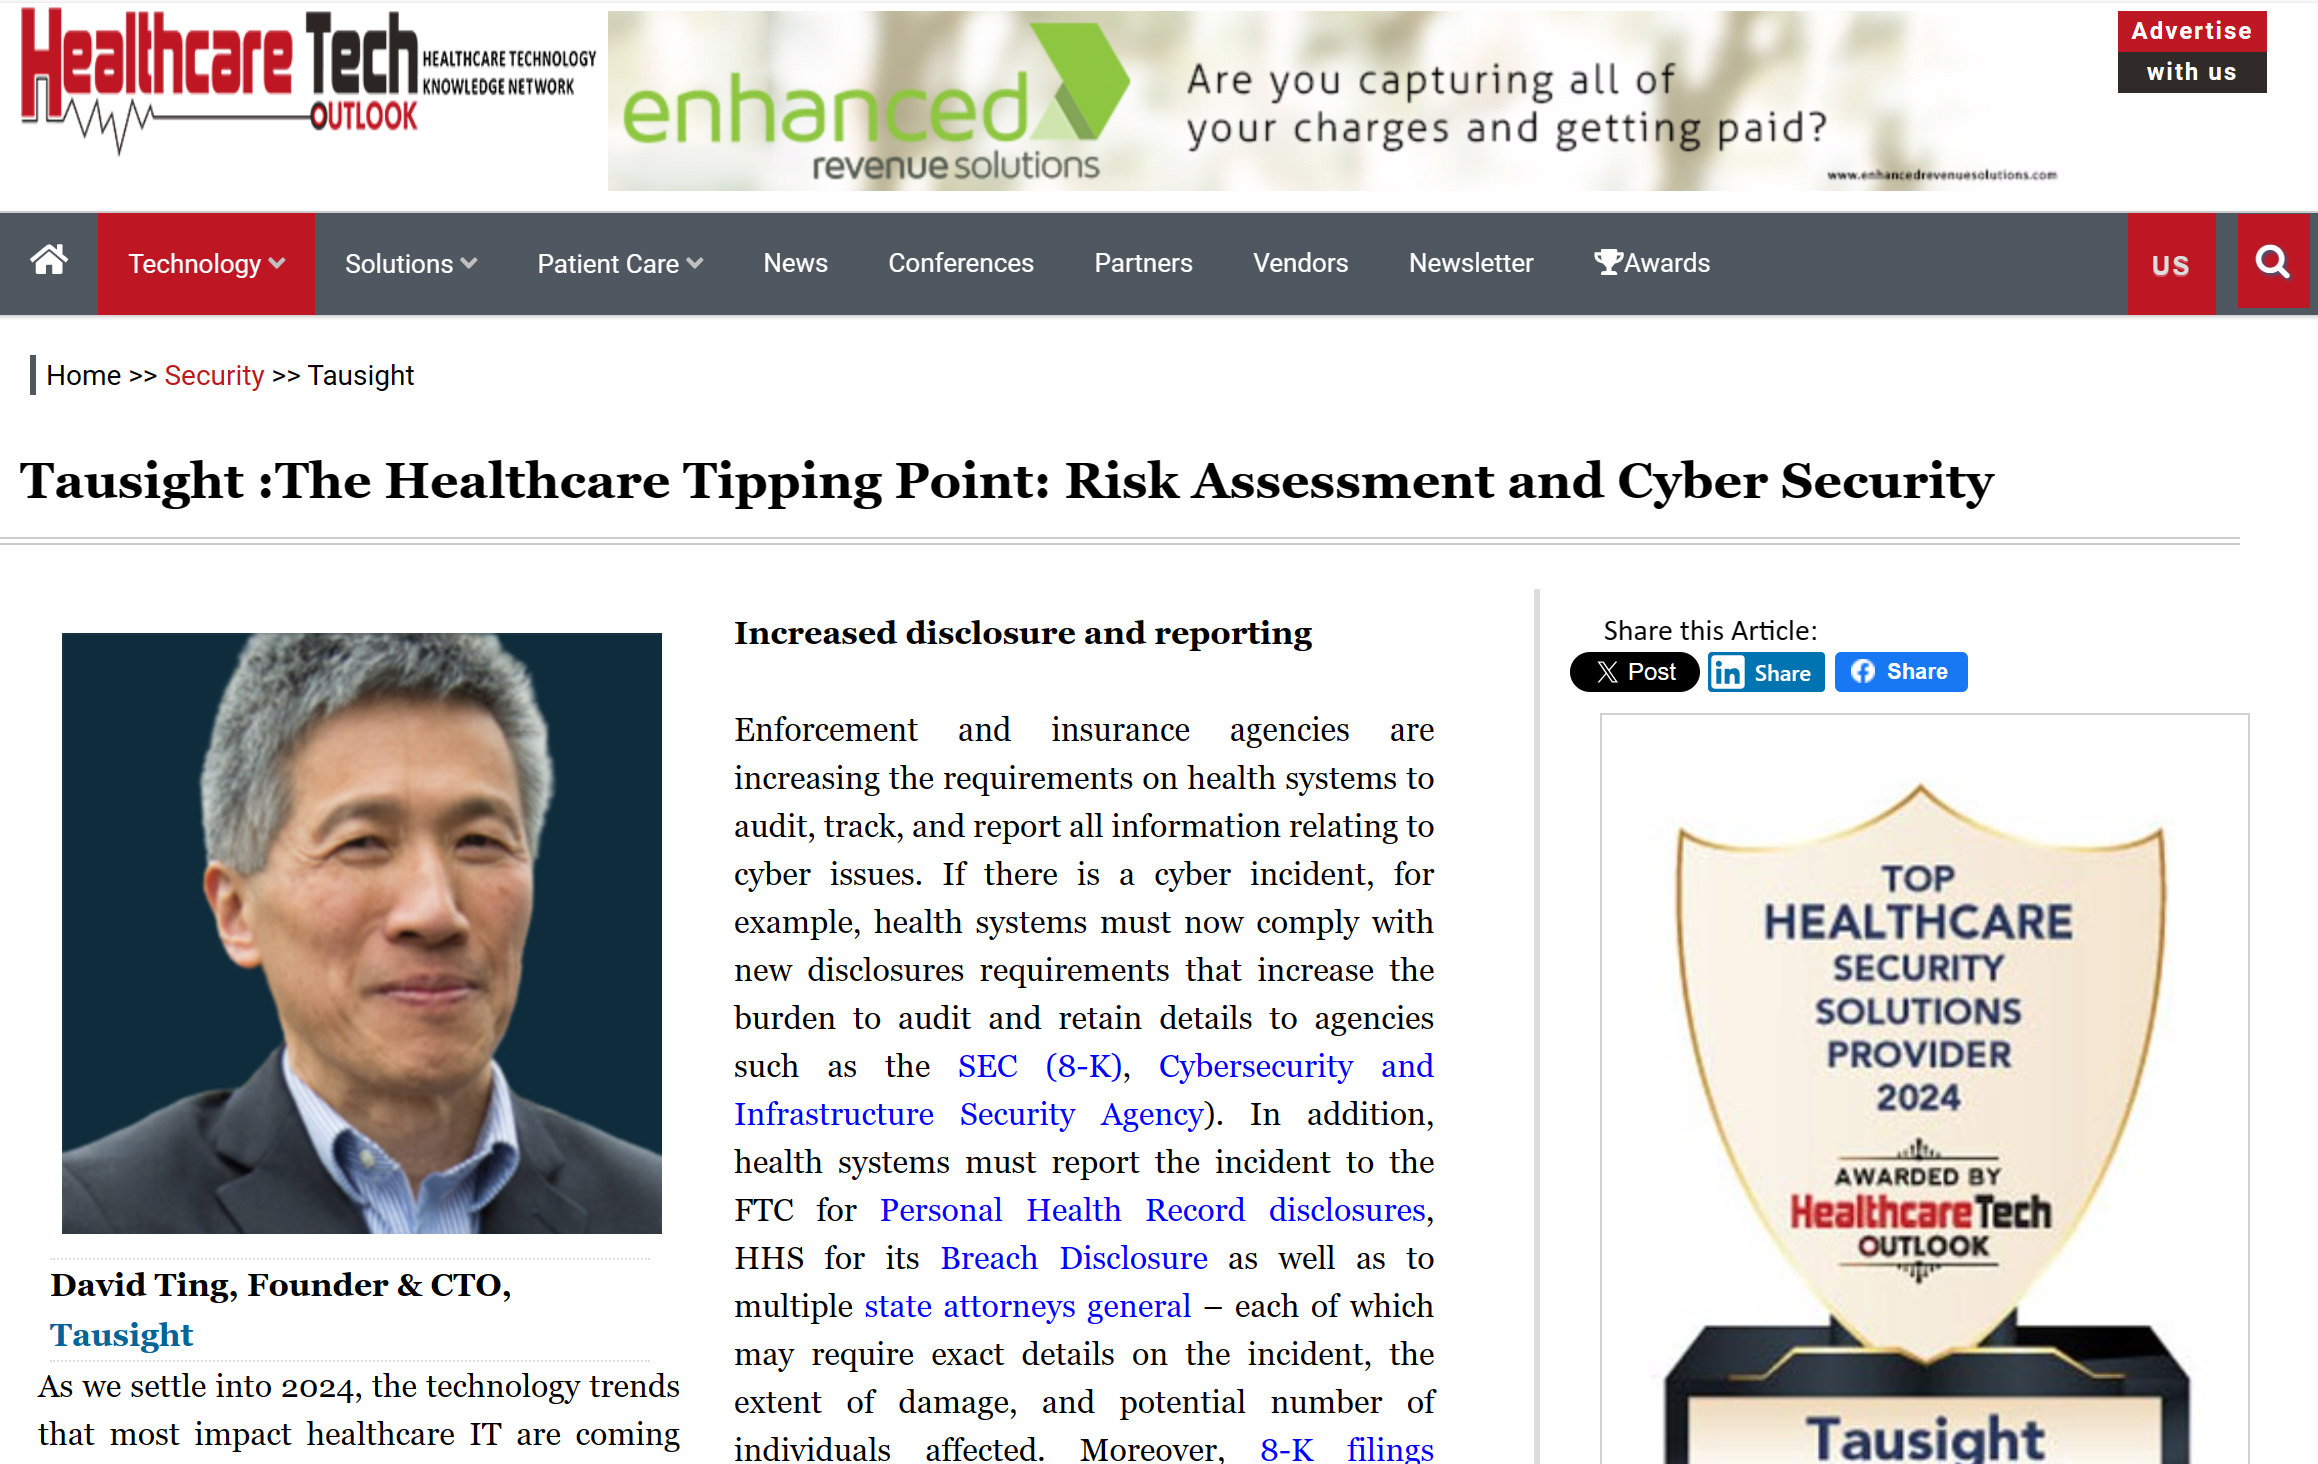 Healthcare Tech Outlook David Ting, Tausight vendor viewpoint – The Healthcare Tipping Point: Risk Assessment and Cyber Security